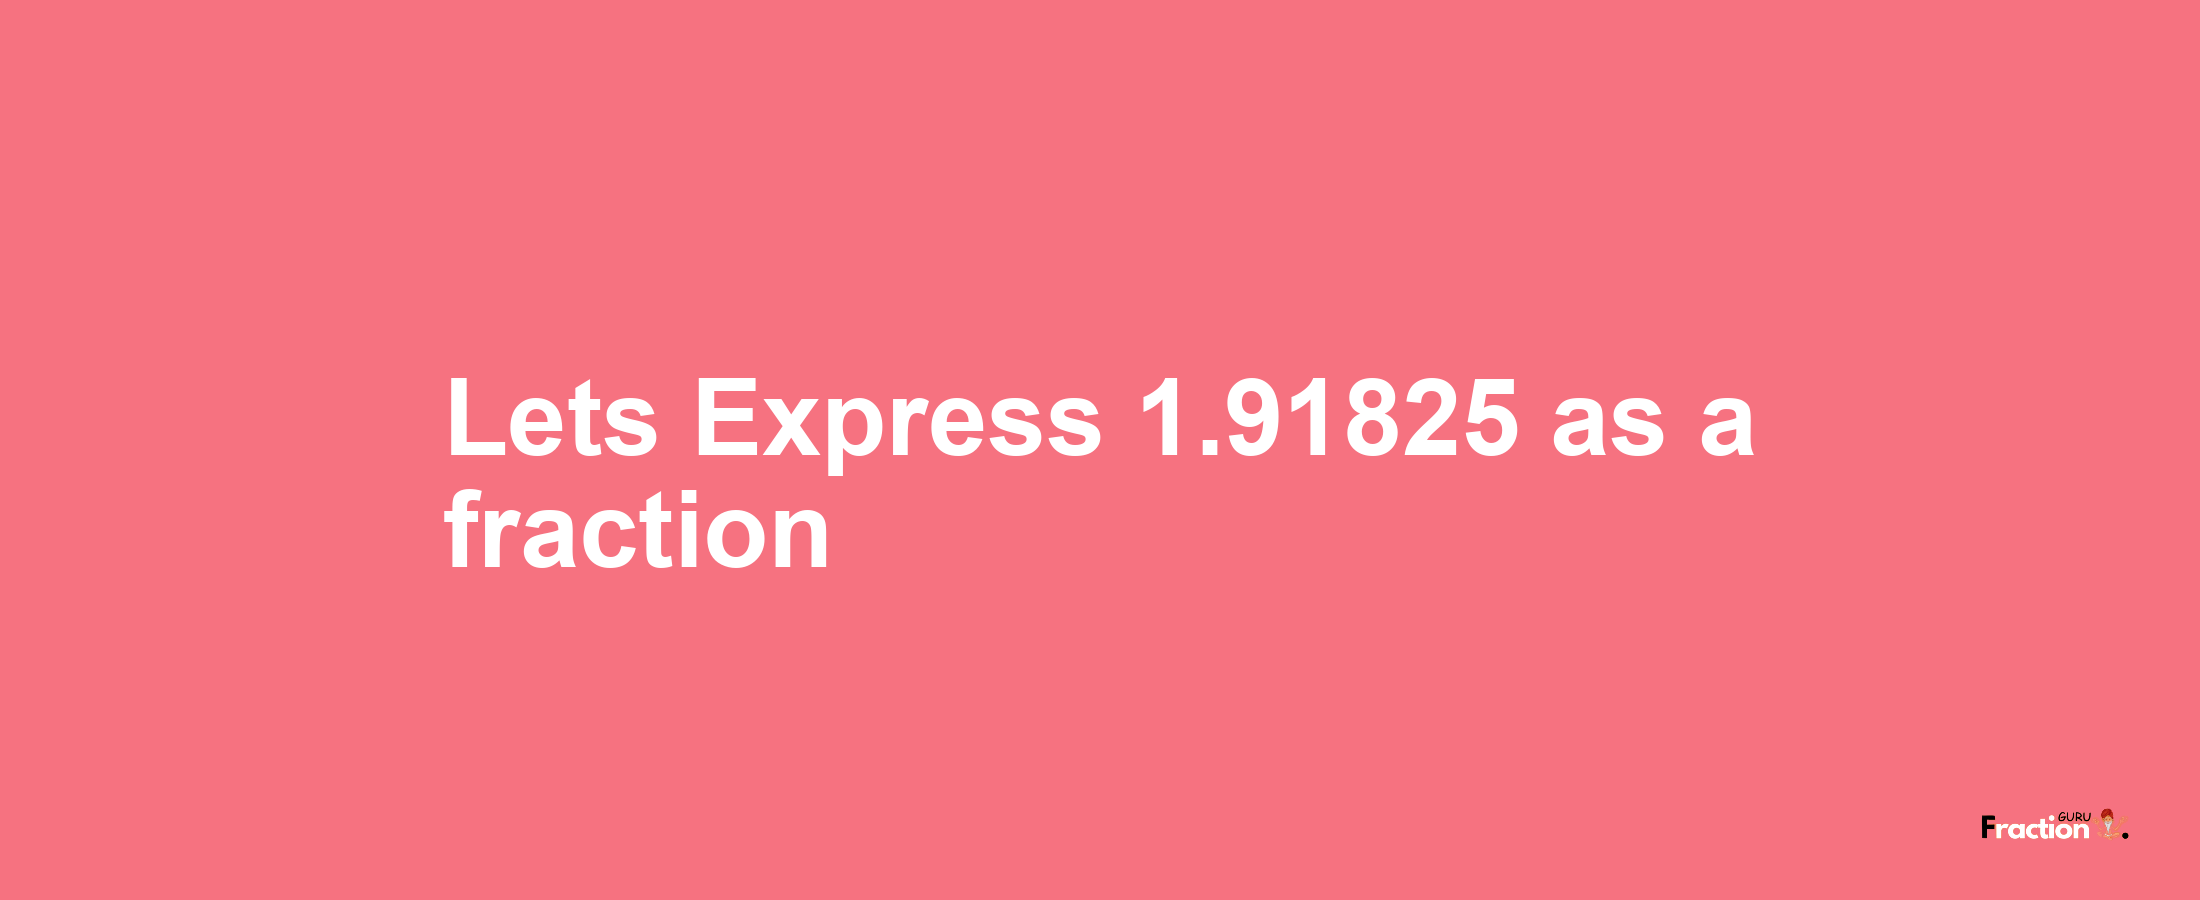 Lets Express 1.91825 as afraction